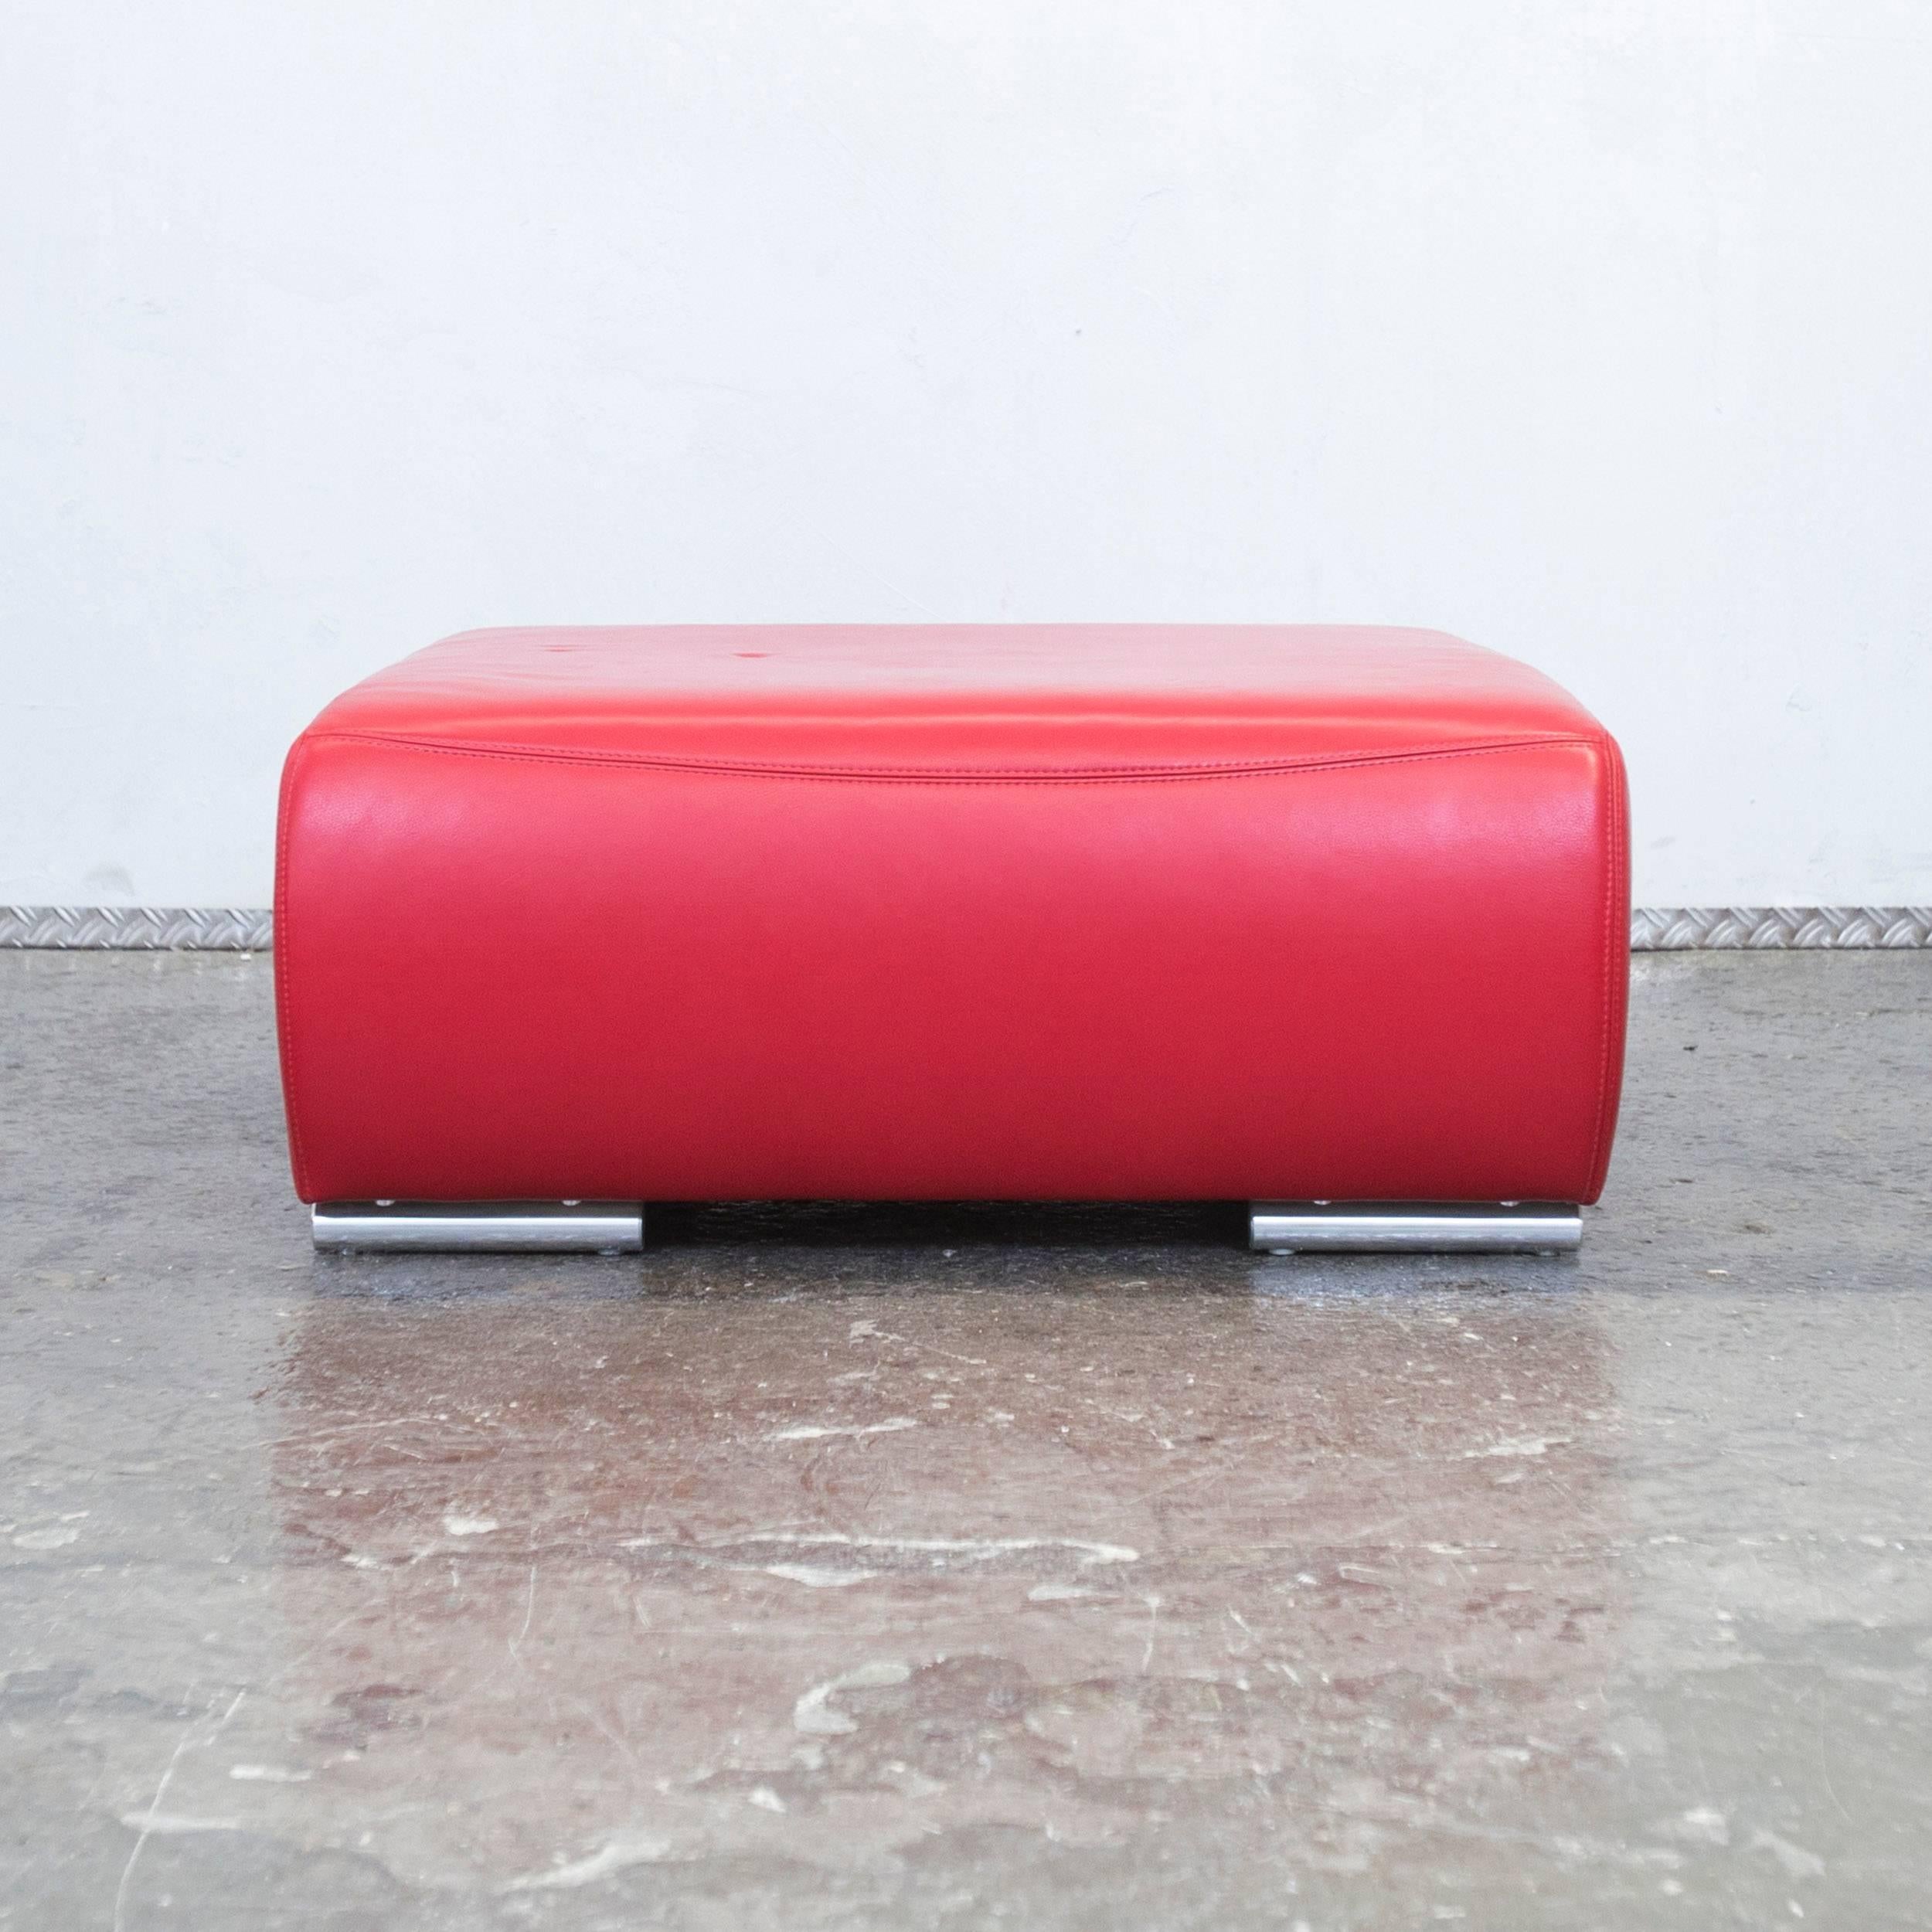 Red colored Hummel designer footstool, designed for pure comfort and flexible placing.